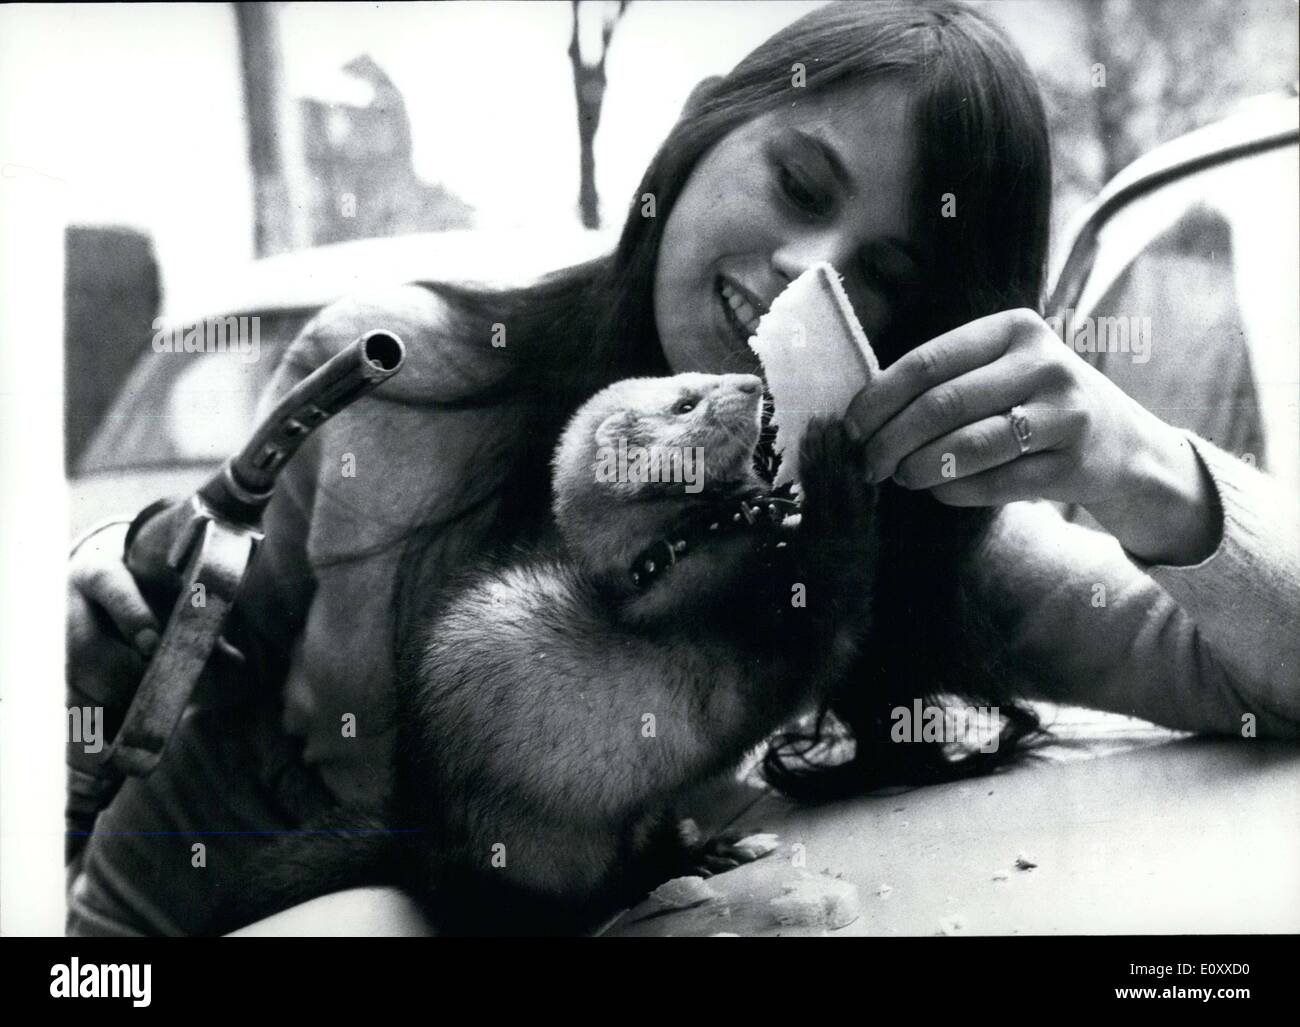 Mar. 04, 1968 - Pictured here is Gabriele and her friend Filius at a gas station in Frankfurt. Filius is a cross between a stoat and a marder. Filius is spoiled rotten as he gets anything he wants. He has an appetite for bread, milk, and dog treats. She doesn't feed him meat. She enjoys taking Filius out for a walk, putting a leash on him like he was a dog. Stock Photo